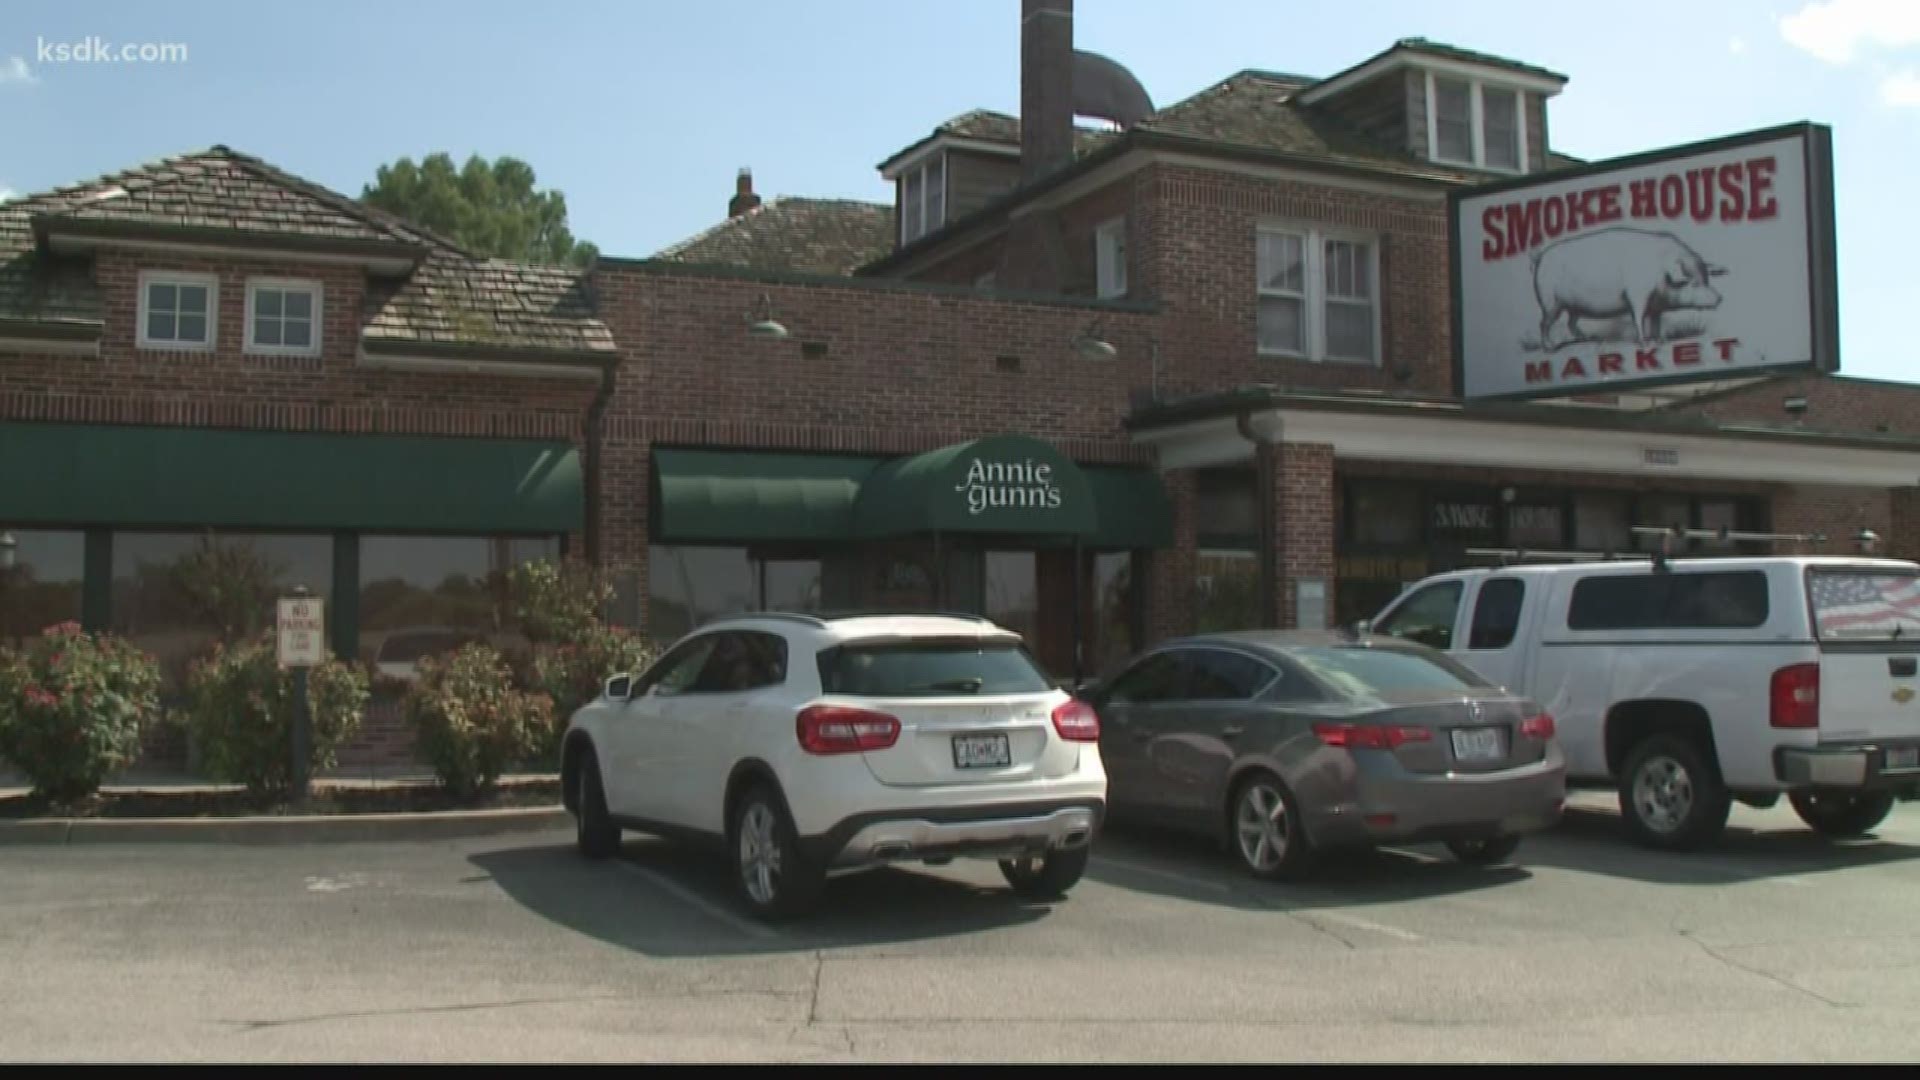 The restaurant has been closed for more than a week, and the owners said none of the employees were showing symptoms the last time they were open.